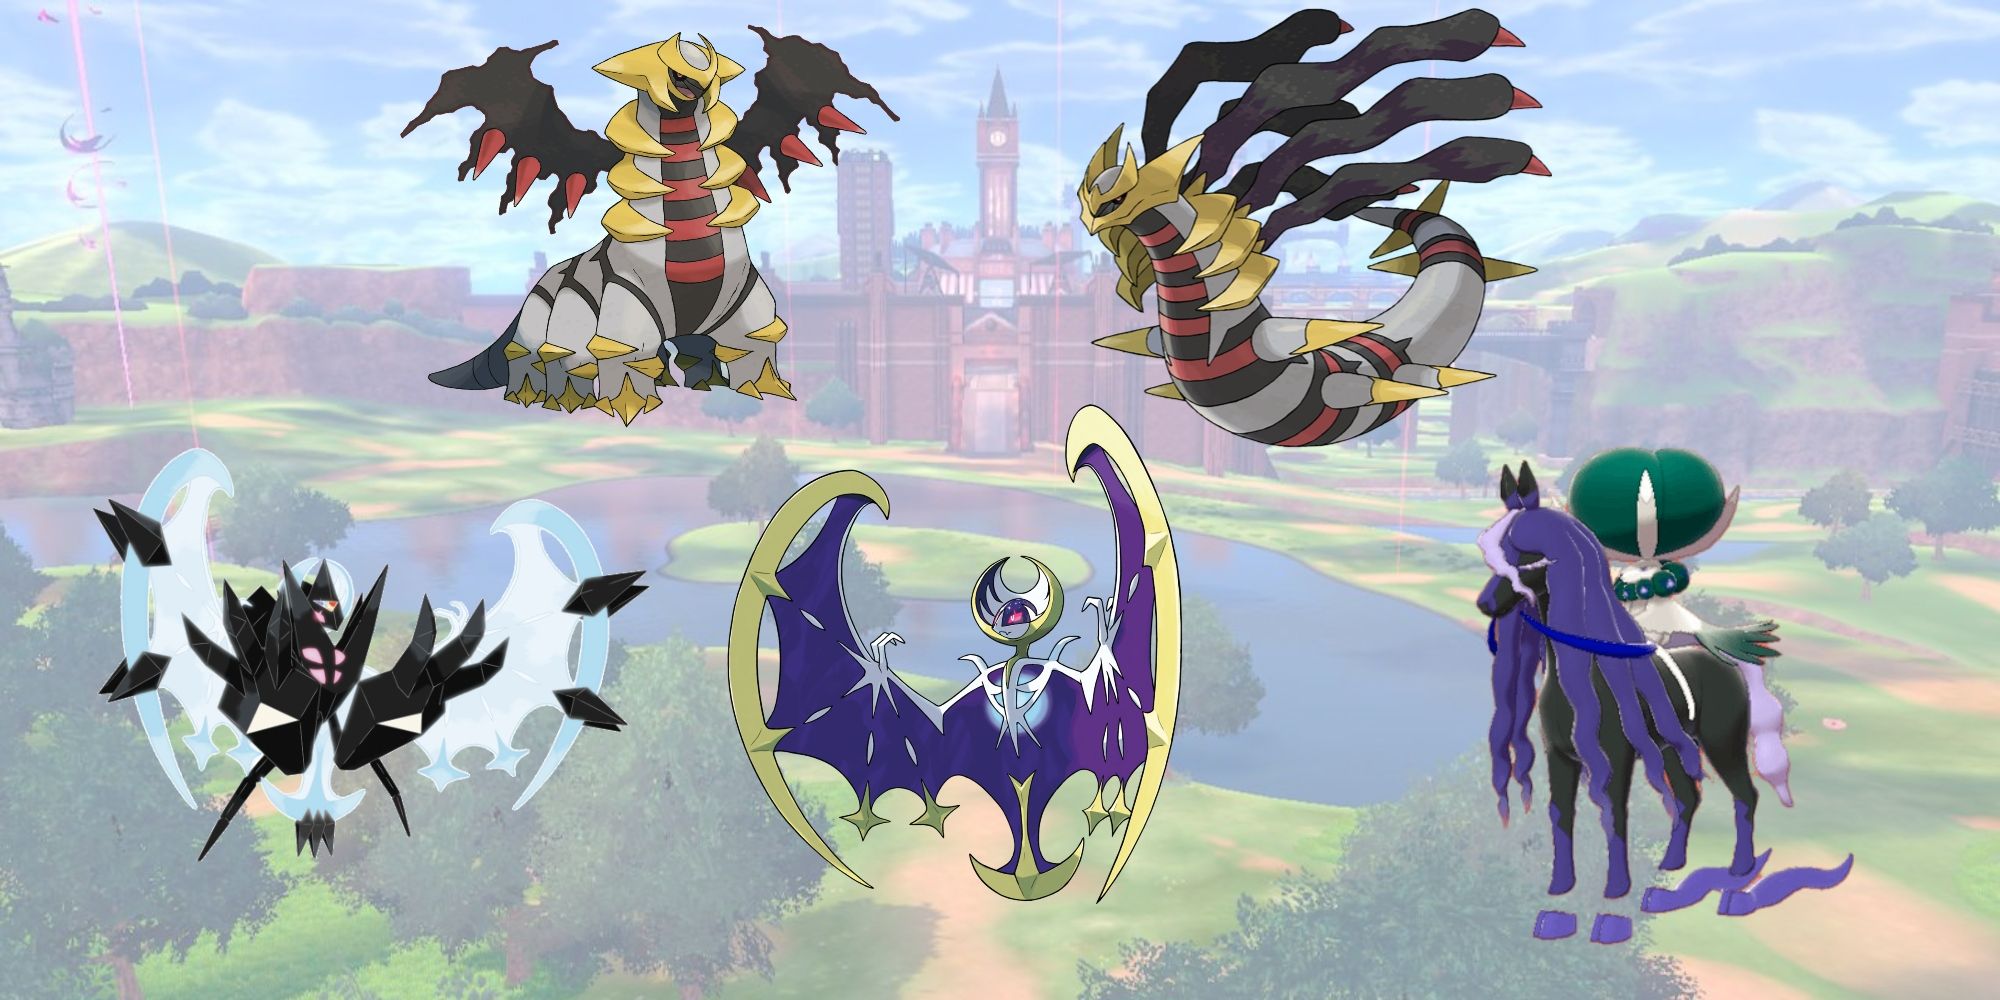 the strongest ghost type pokemon - giratina altered form, giratina origin form, dawn wings necrozma, lunala, and shadow rider calyrex, overlaid on an image of the galar wild area from sword &amp; shield 